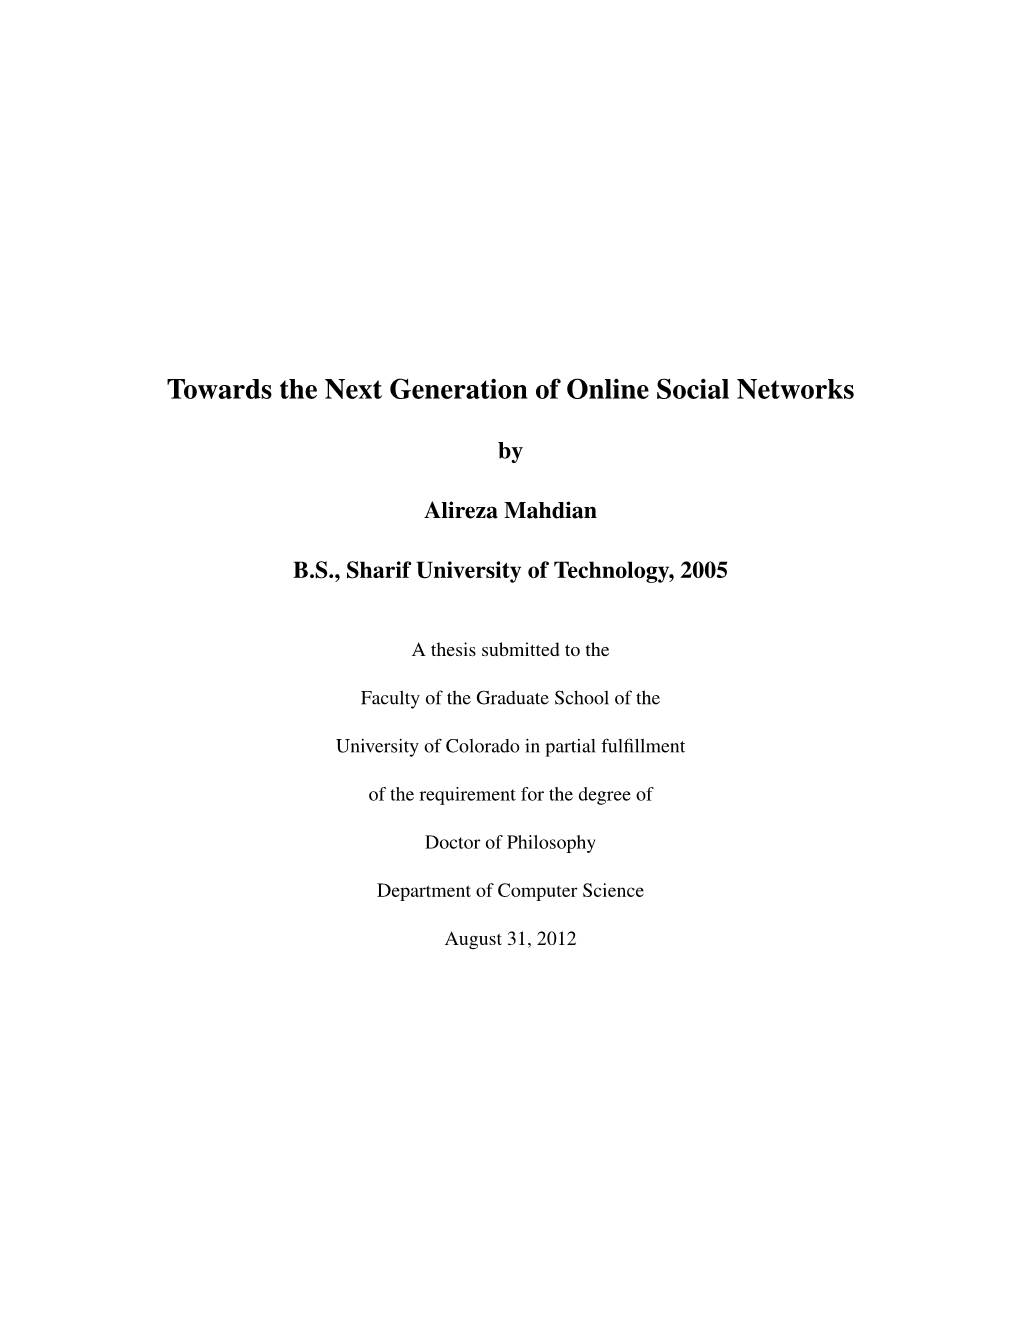 Towards the Next Generation of Online Social Networks